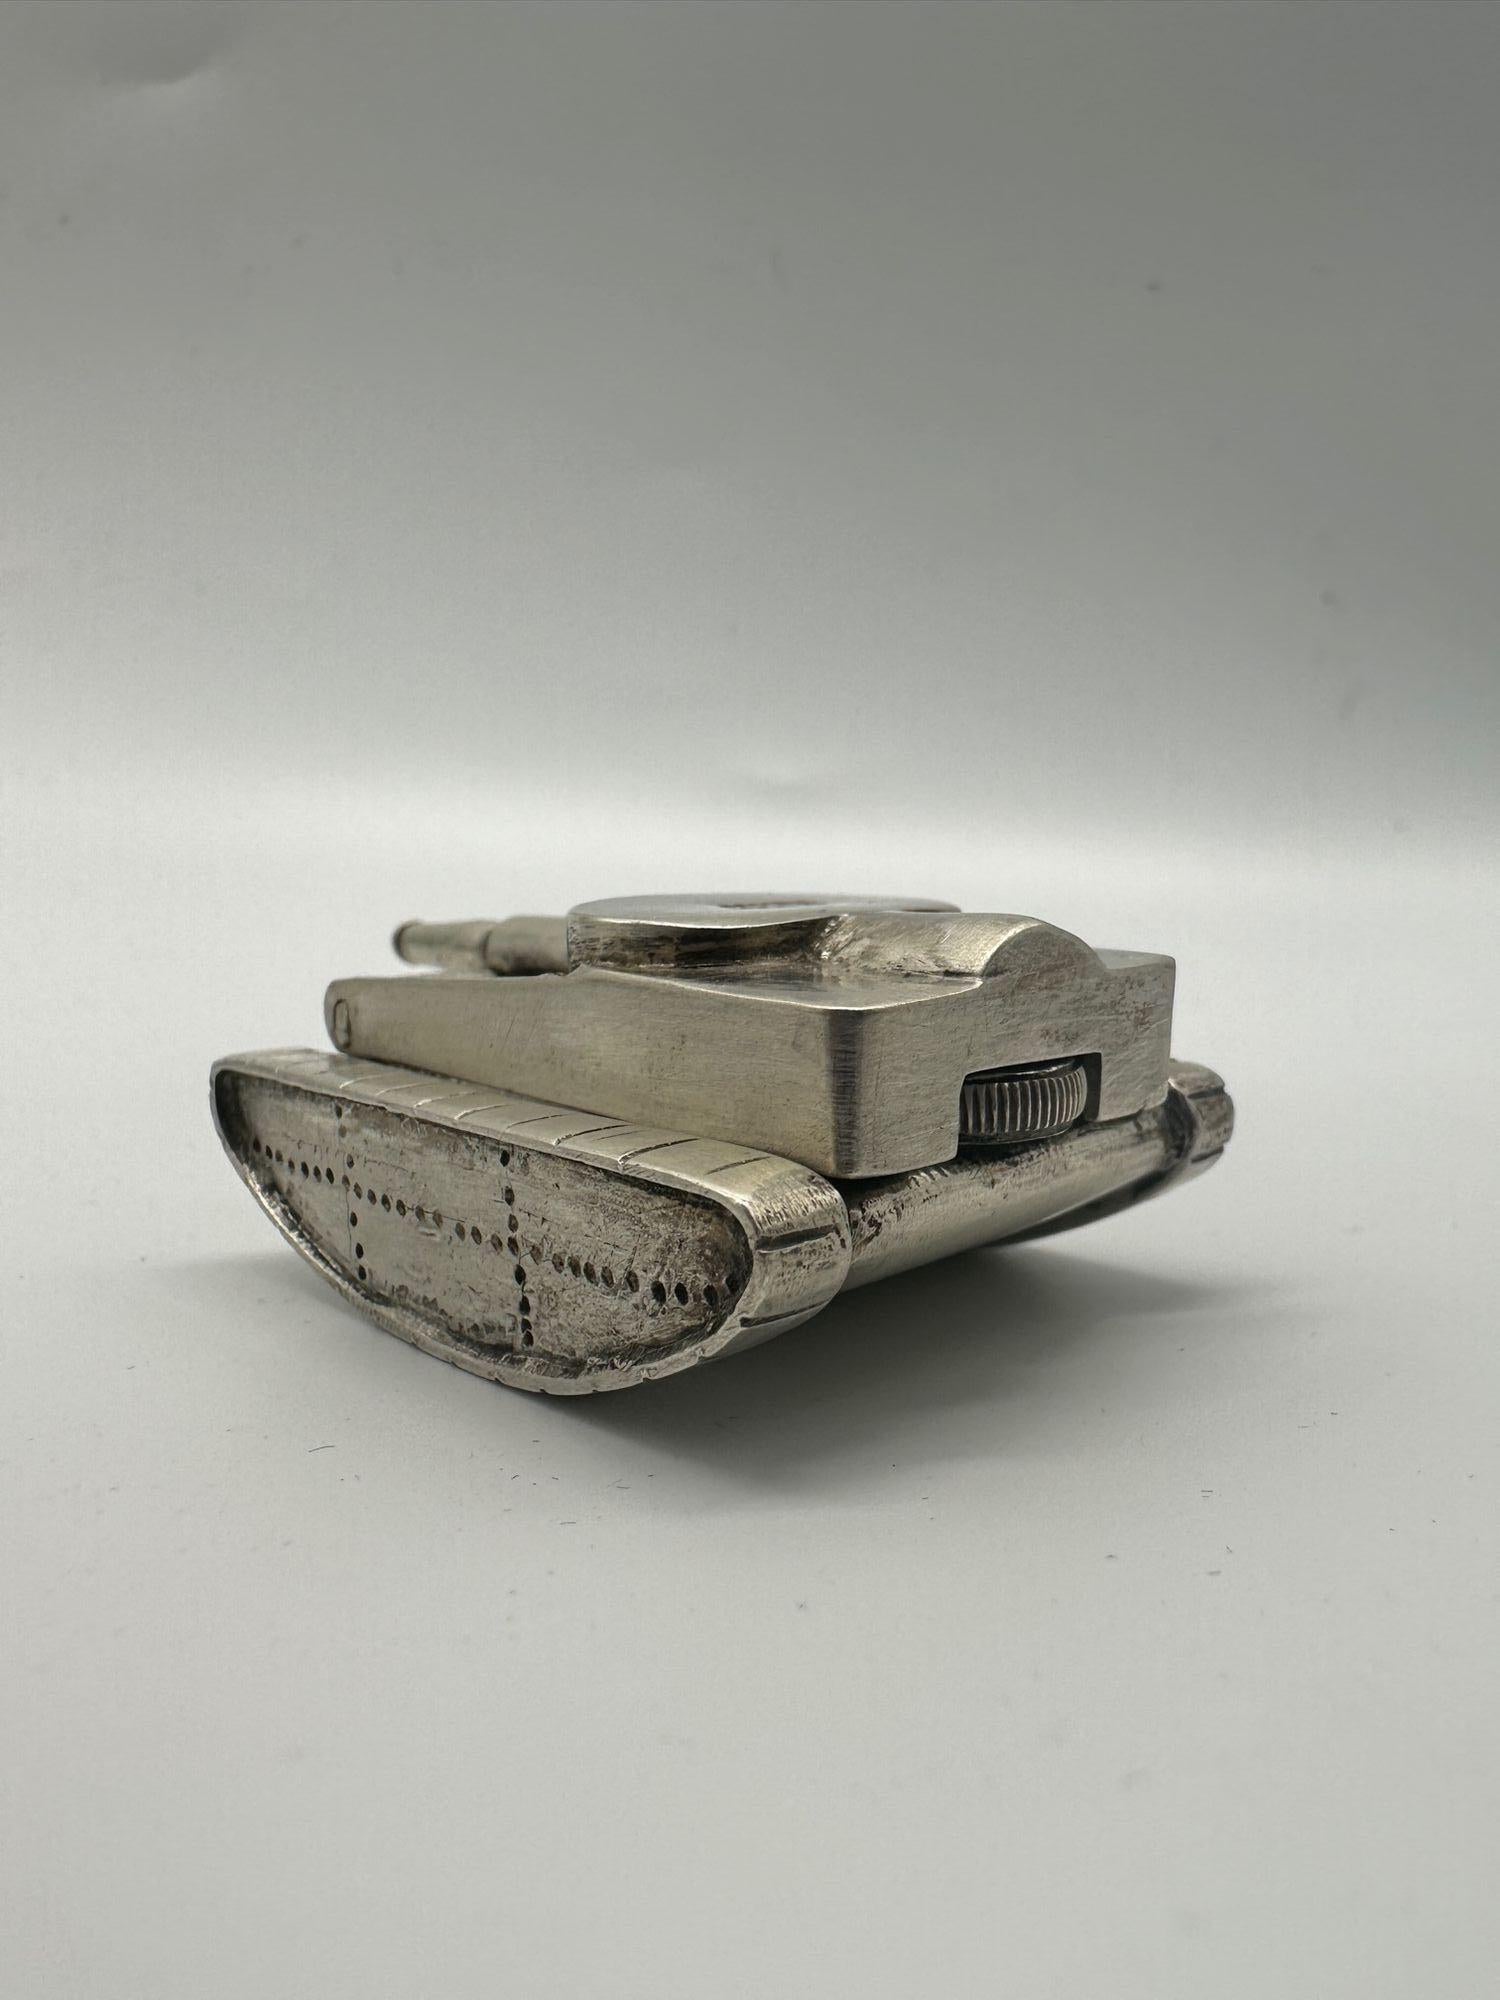 Rare Vintage Military Tank SilverLighter For Sale 1